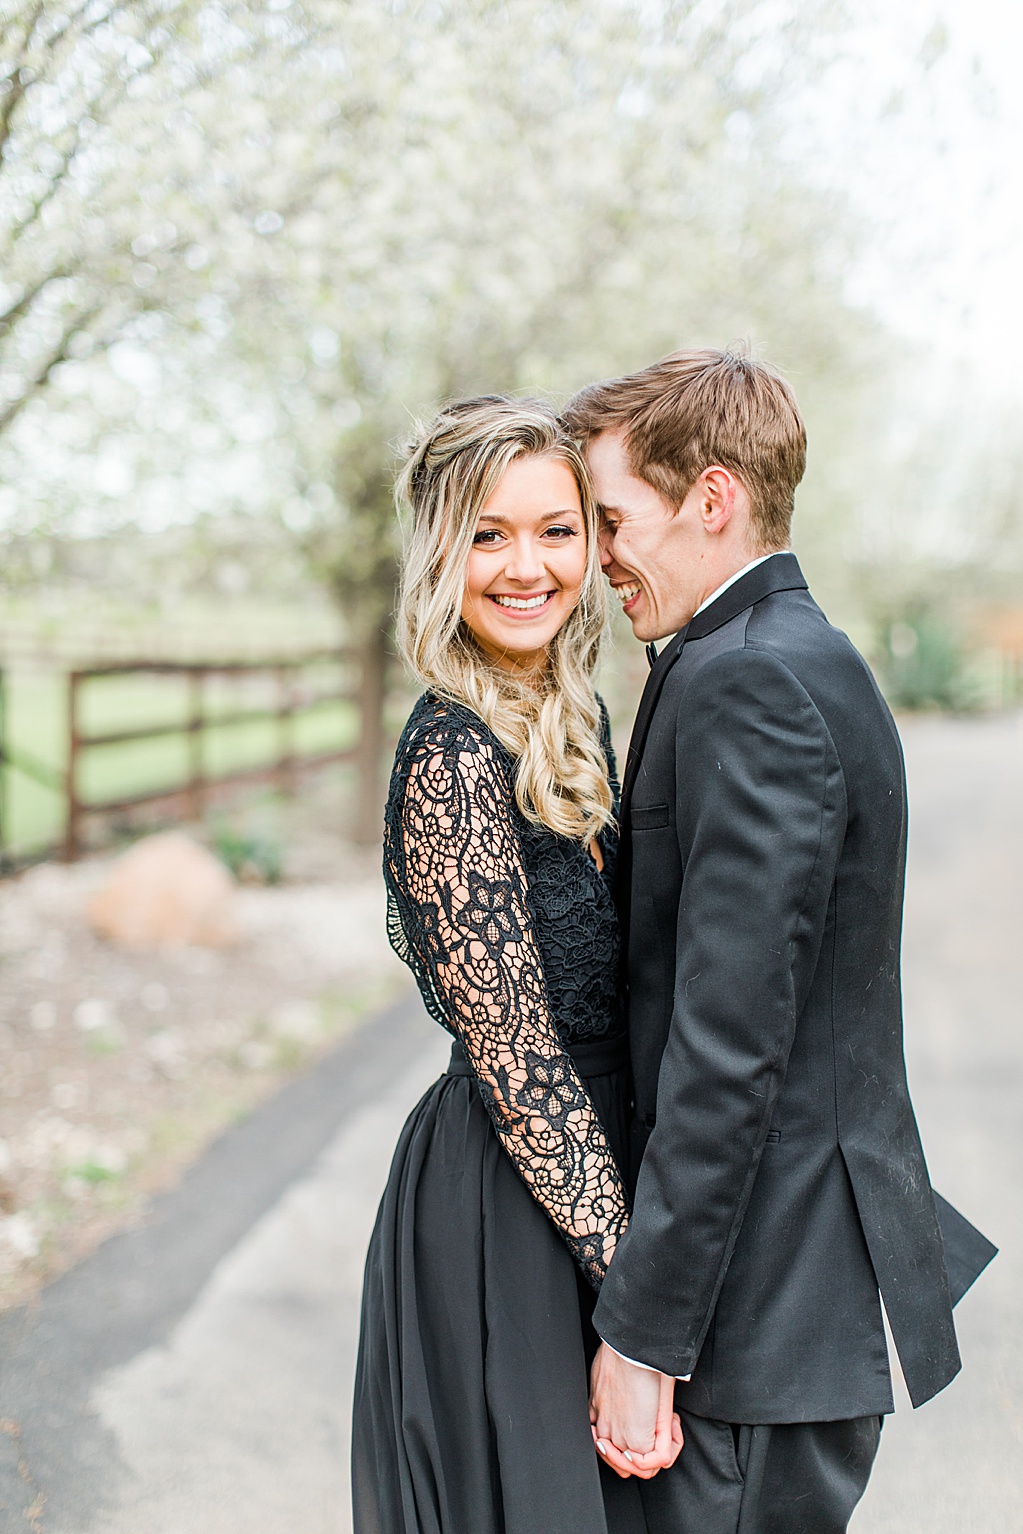 King River Ranch Wedding Venue in Johnson City Engagement Photos in the white Pear blossoms by Allison Jeffers Wedding Photography 0024